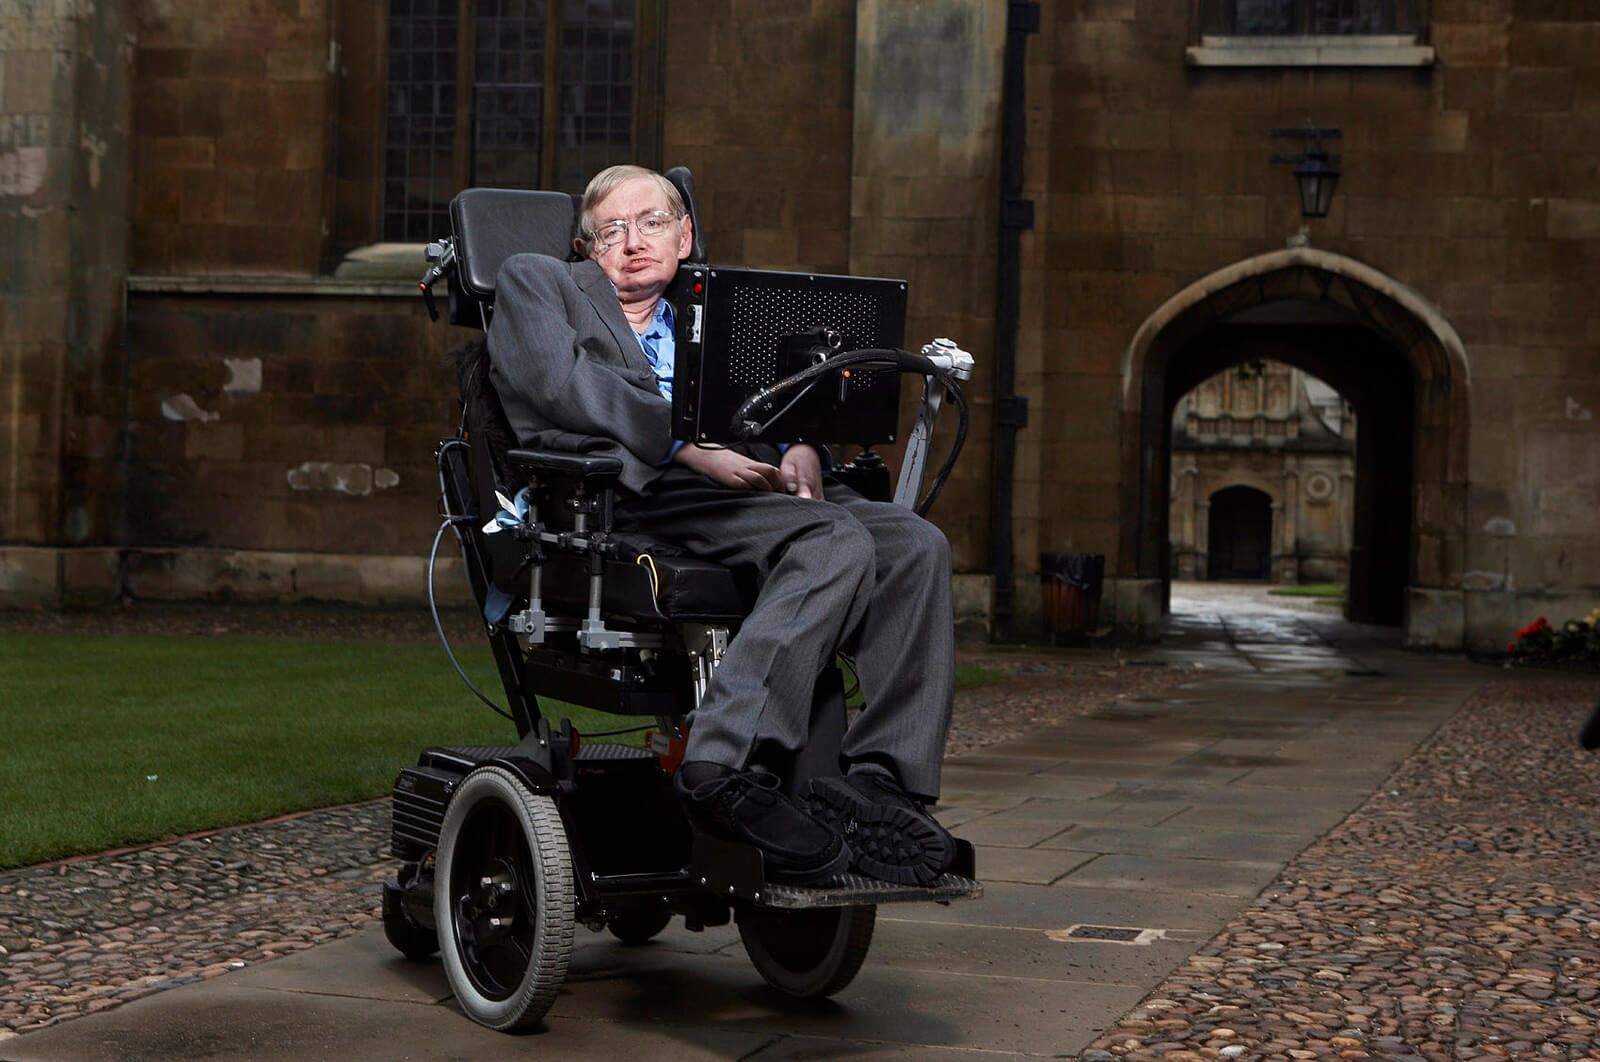 doctoral-thesis-by-stephen-hawking-opened-to-the-public-by-the-university-of-cambridge-dbfe6f888c5bfab95b8a879f251541cf.jpg